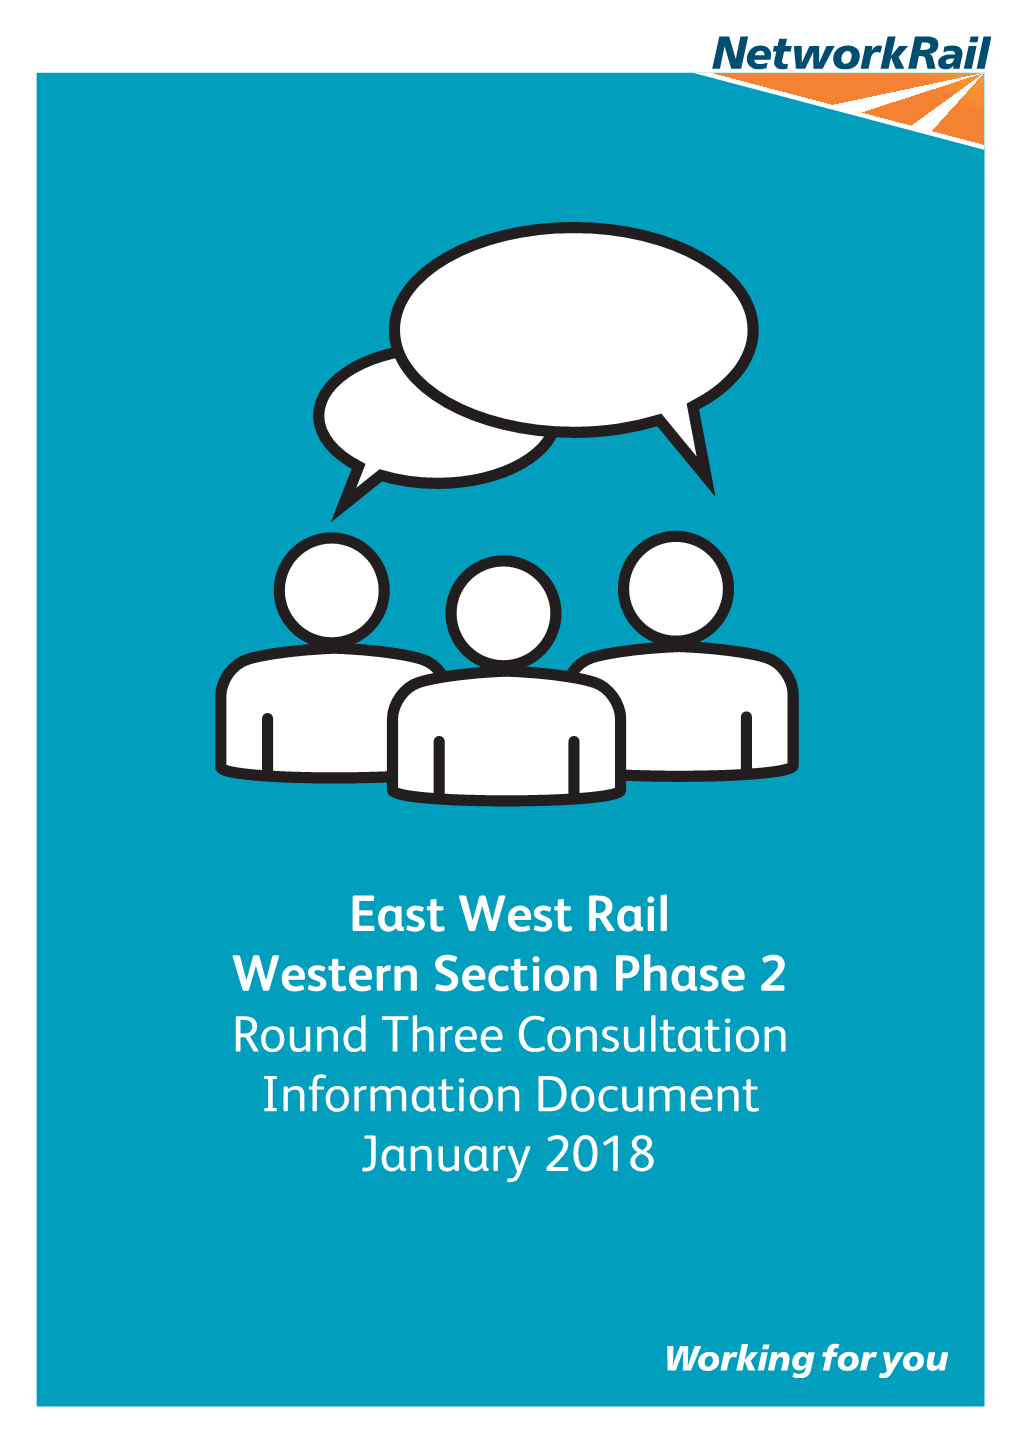 East West Rail Western Section Phase 2 Round Three Consultation